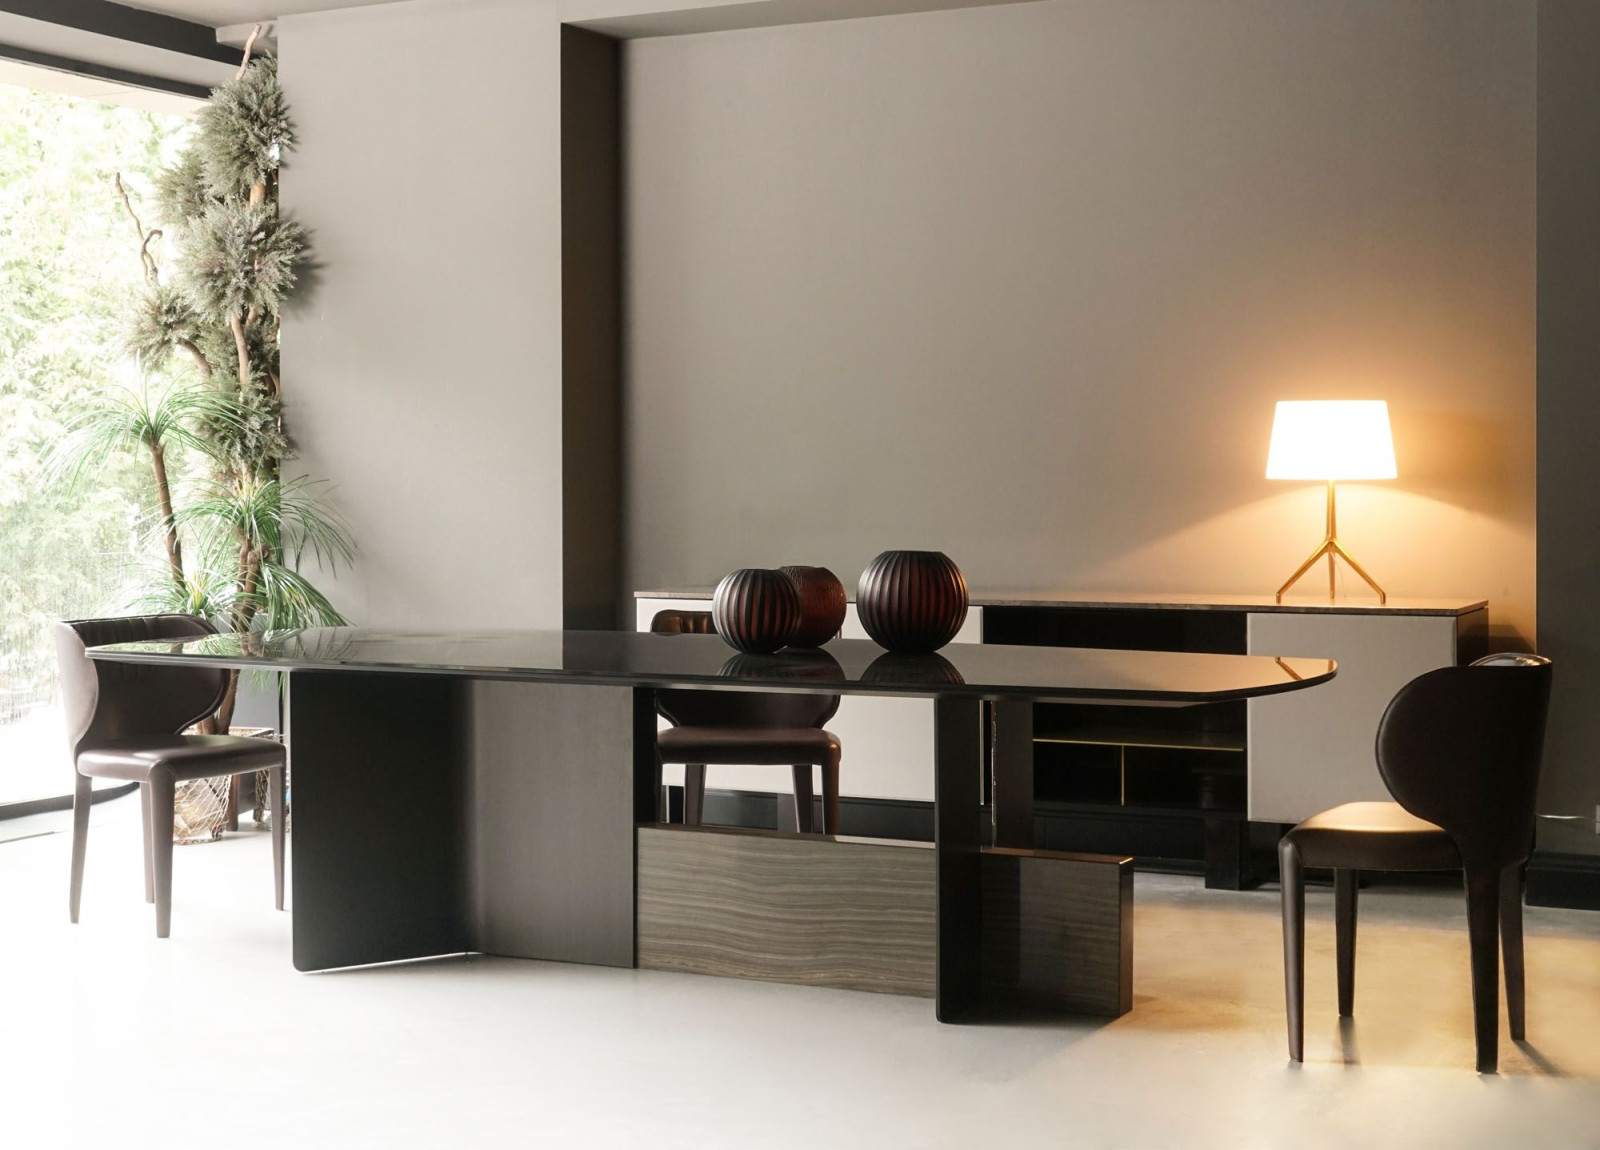 3. view of the Ritz Table placed in a modern living room